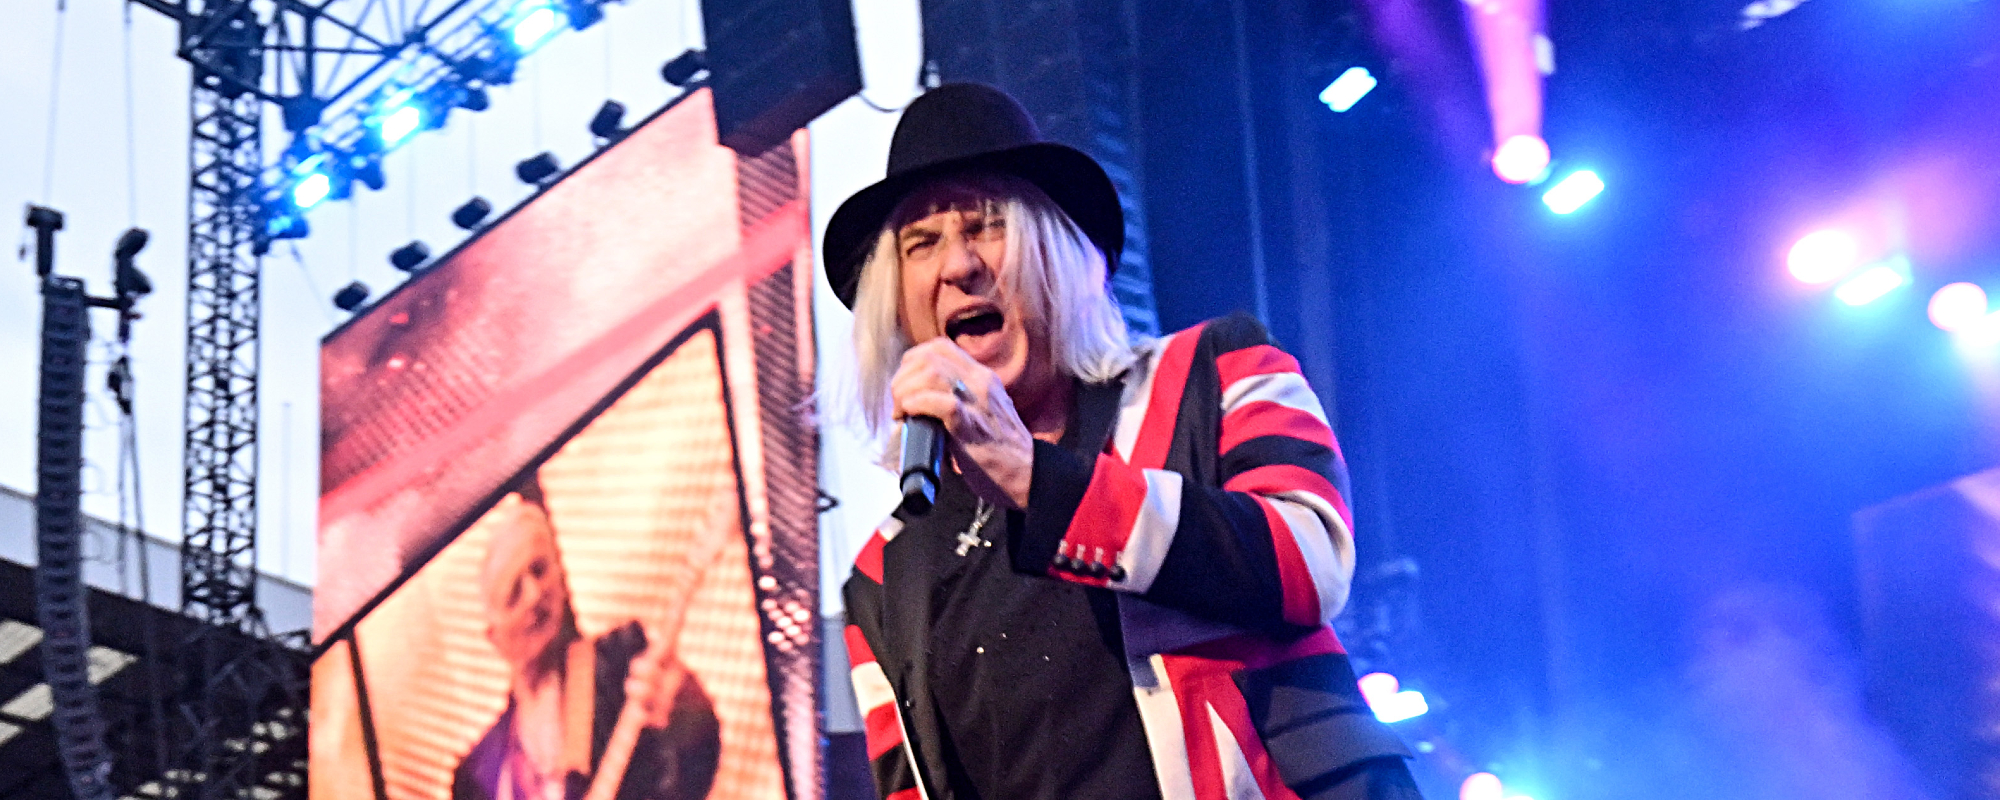 Def Leppard’s Joe Elliott Explains How a Hole in the Wall Led to the Hit Song “Photograph”